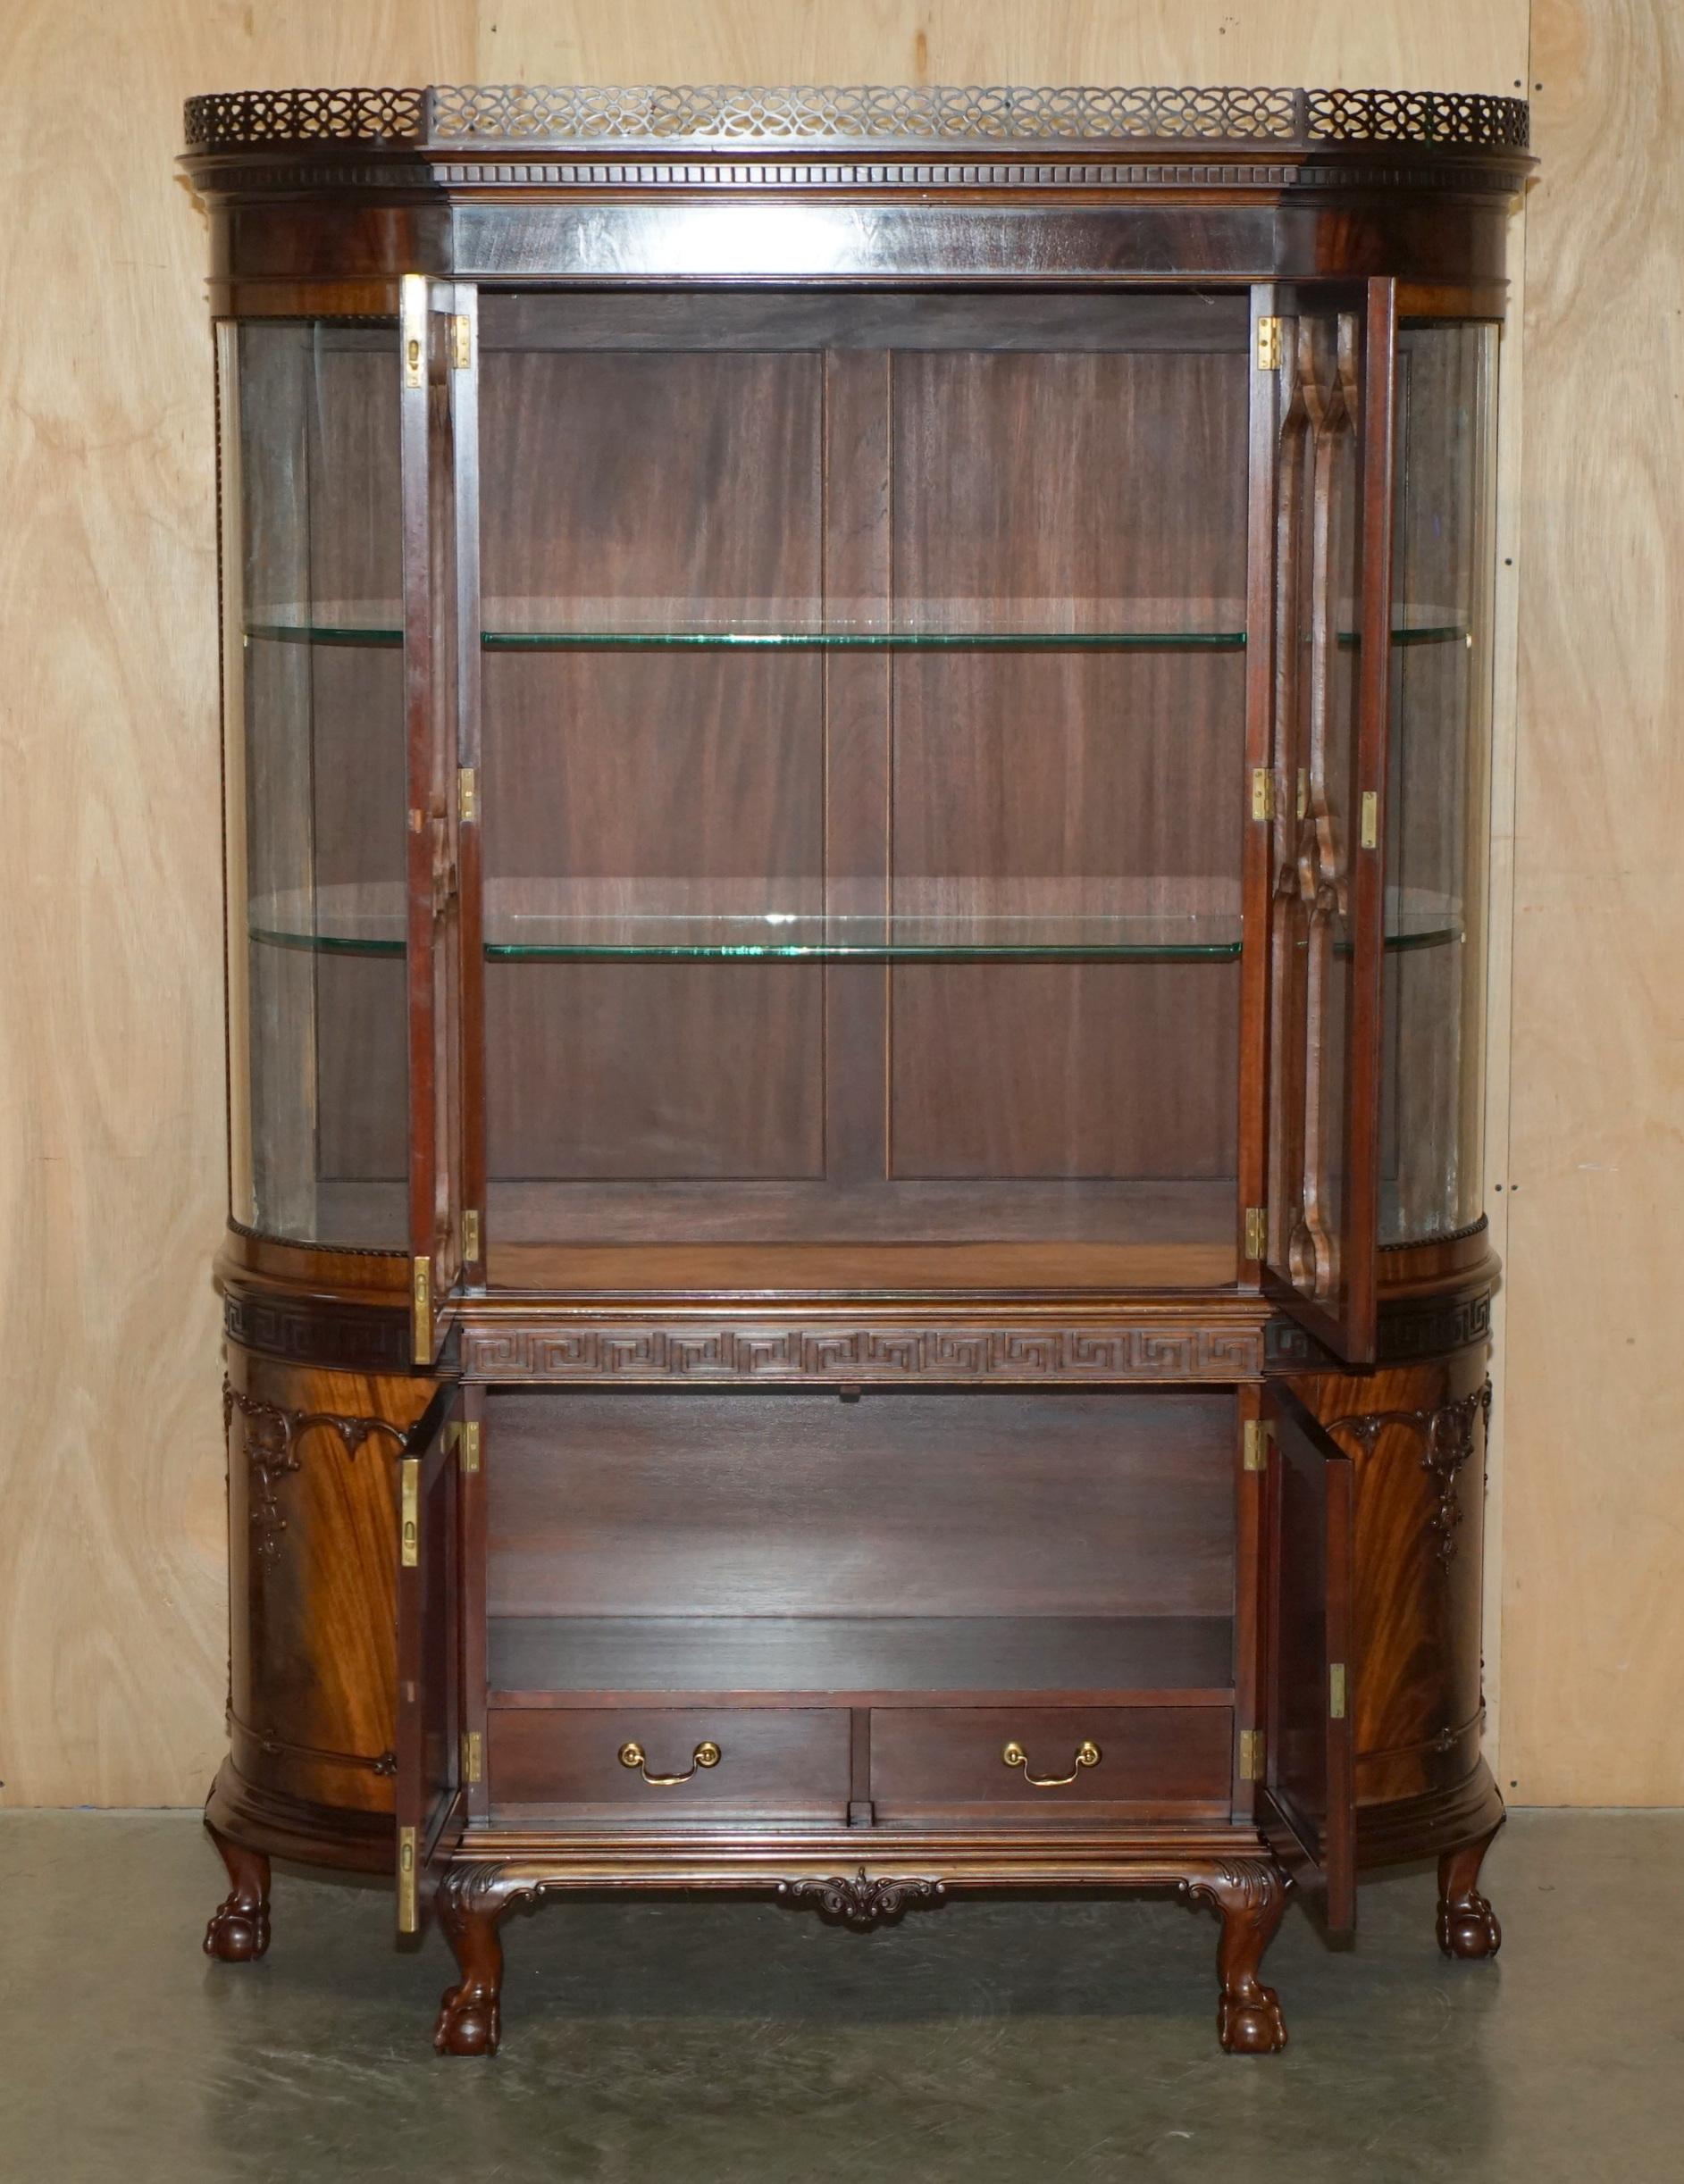 Exquisite ANTIQUE CHARLES BAker OF CHIPPENDALE HOUSE STAMPED DISPLAY CABINET im Angebot 10